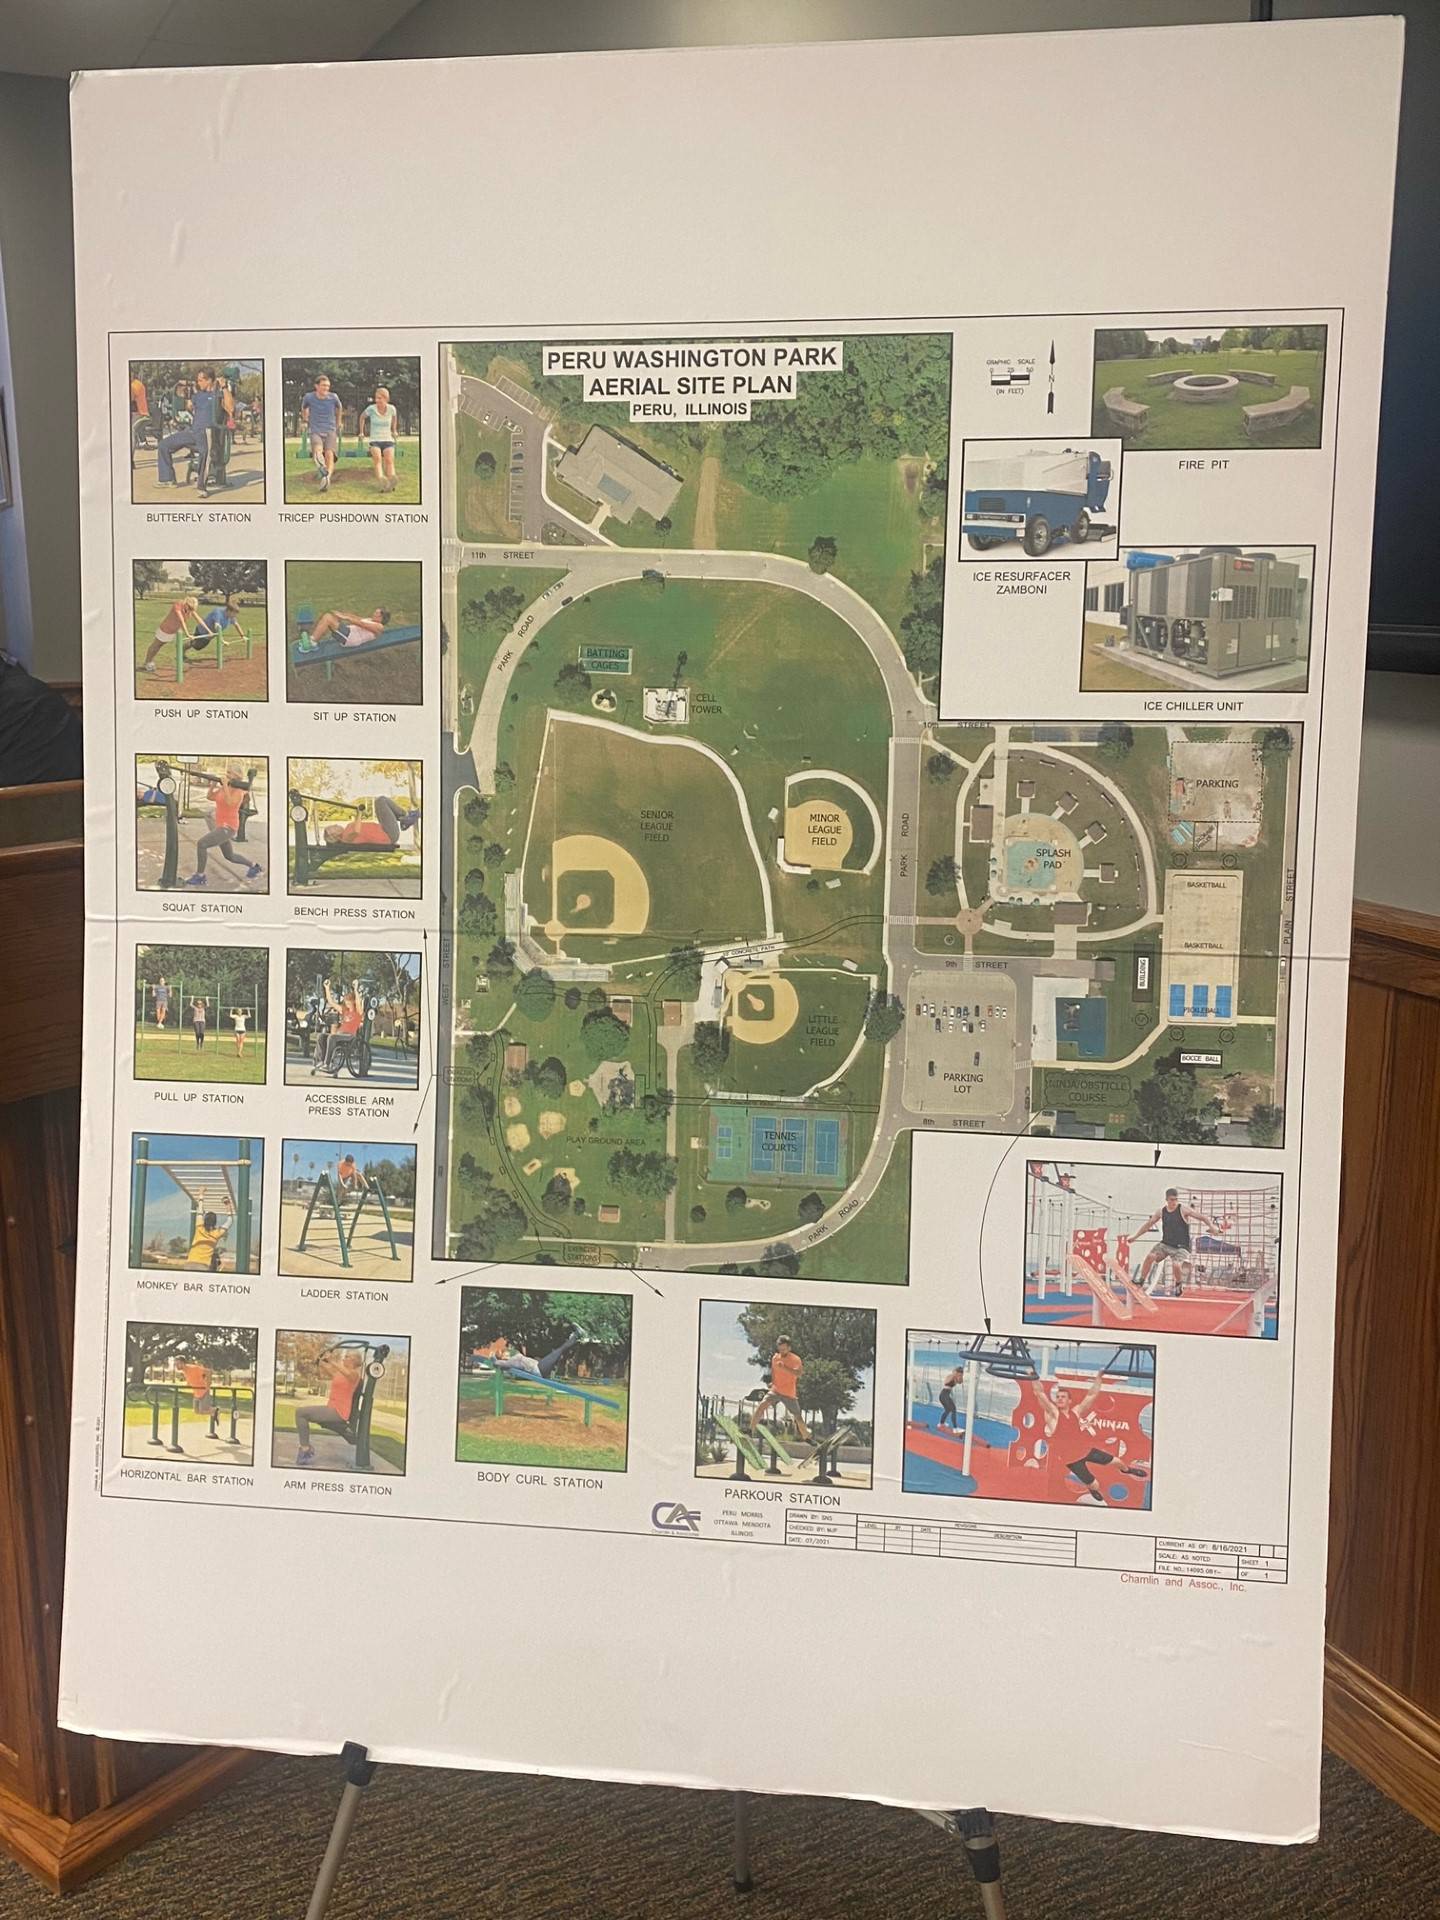 The planned project through the OSLAD grant includes chiller building, ice resurfacer Zamboni and fire pits for the ice rink as well as additional recreational activities, such as an indoor heated bathroom and locker room facility, a ninja gym course and fitness equipment on the trail.